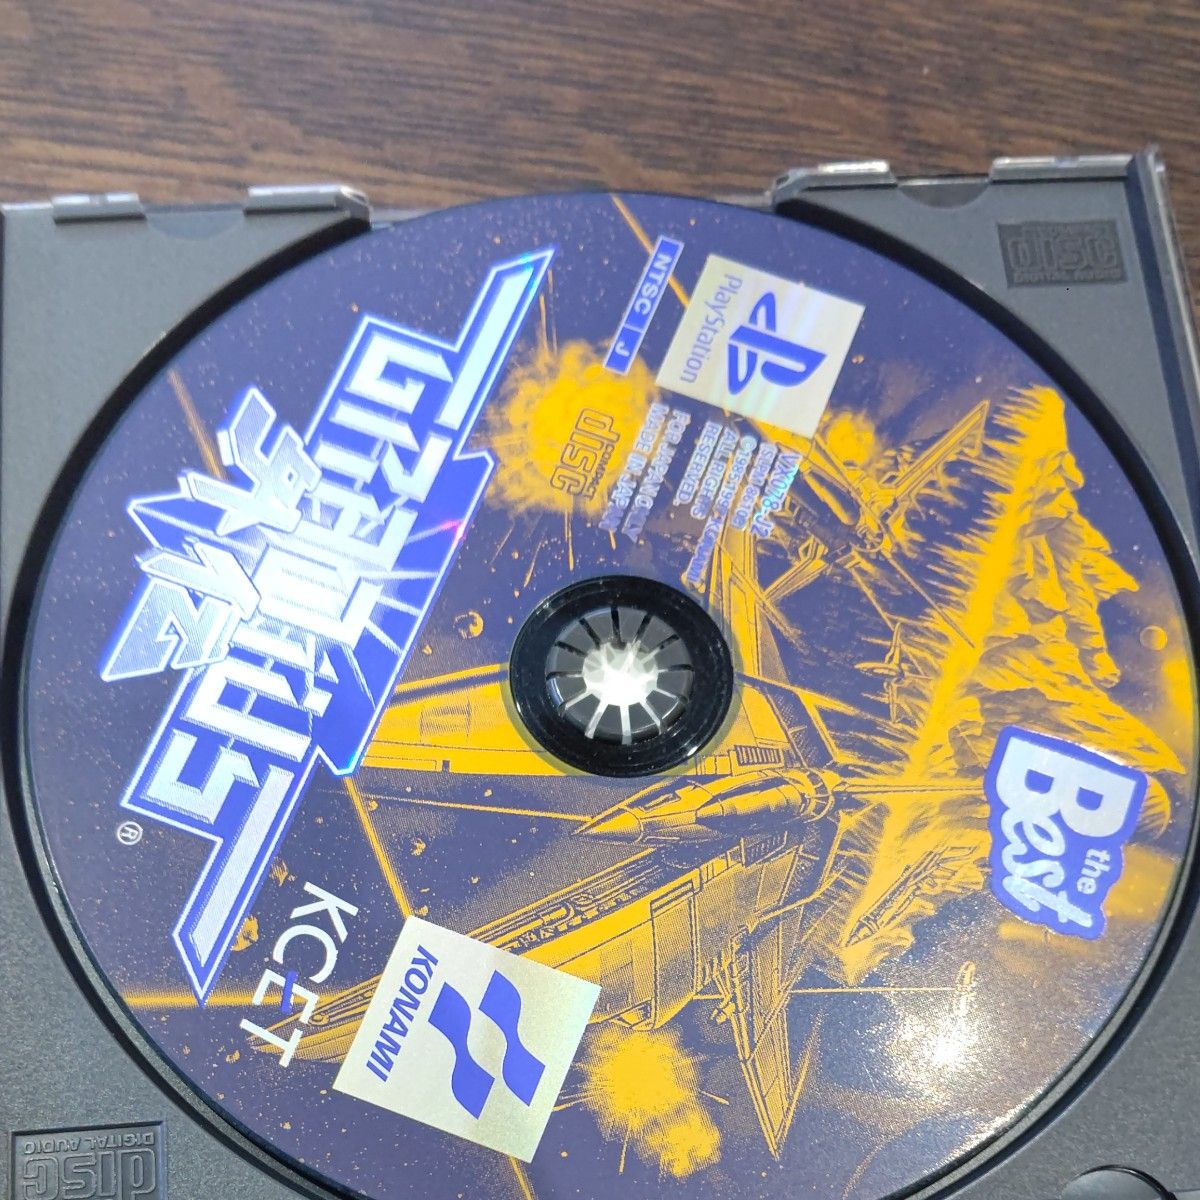 PS グラディウス外伝 Playstation the Best PS1 Gradius